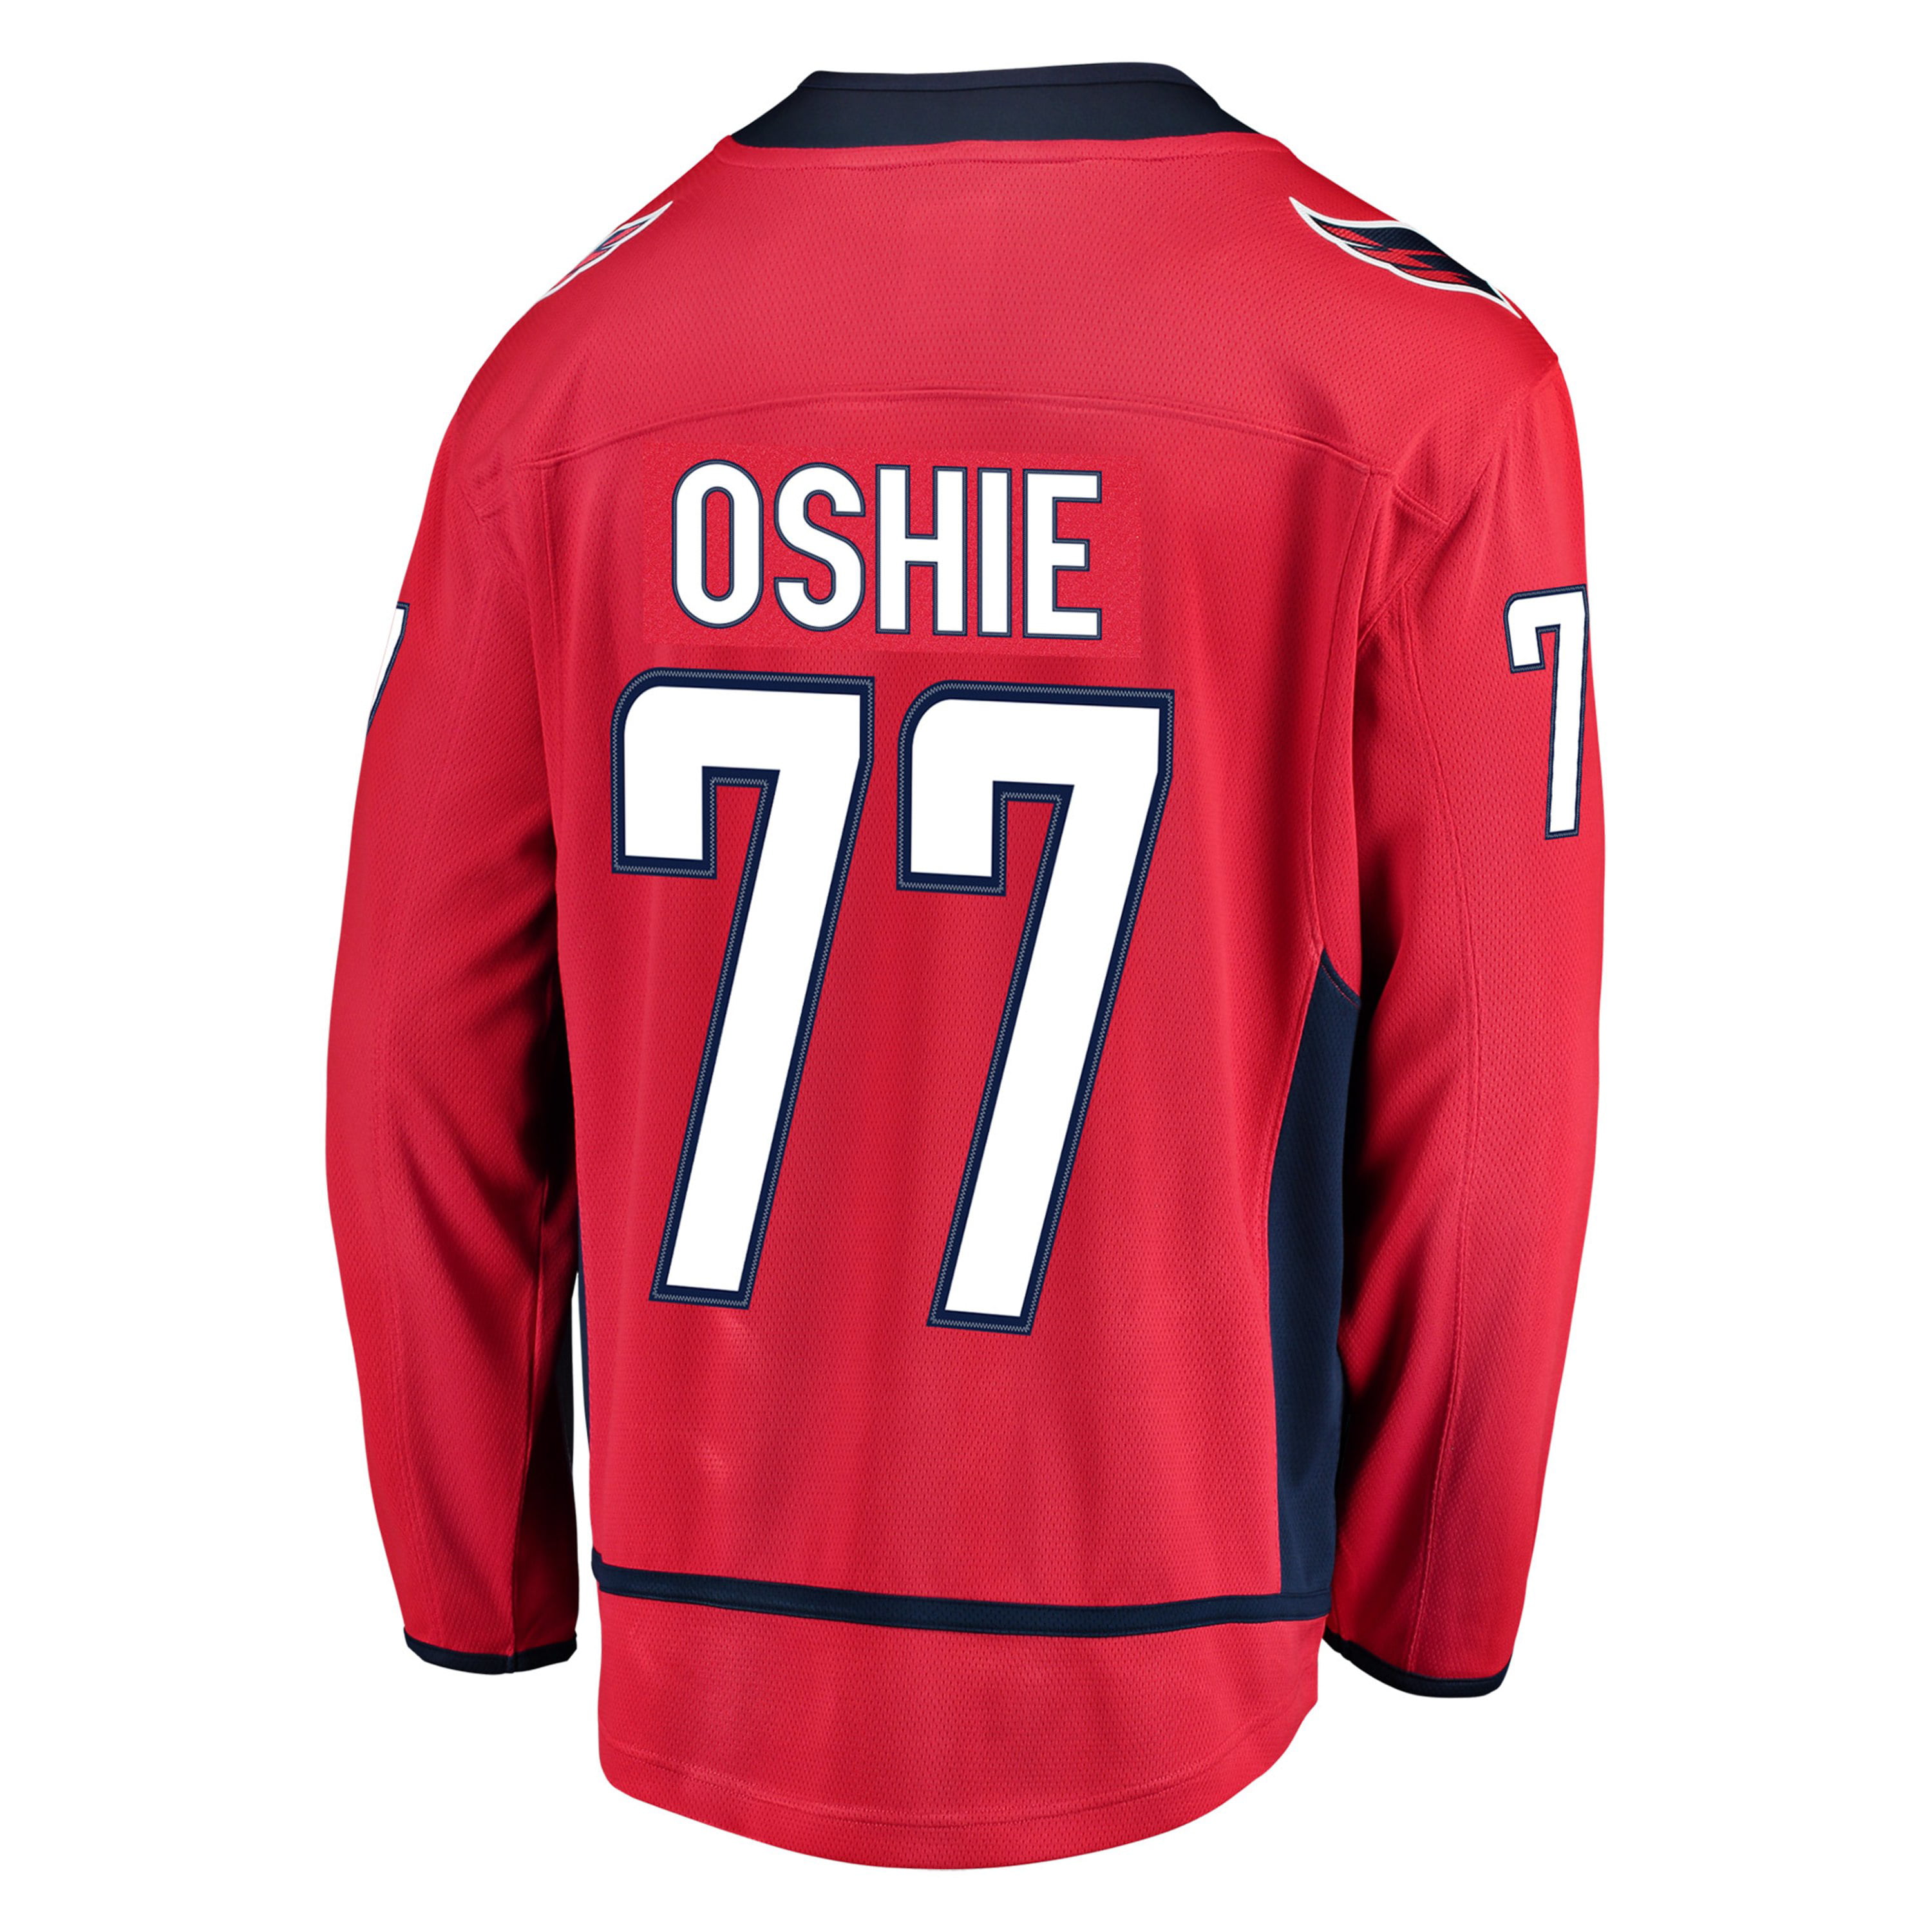 oshie jersey capitals